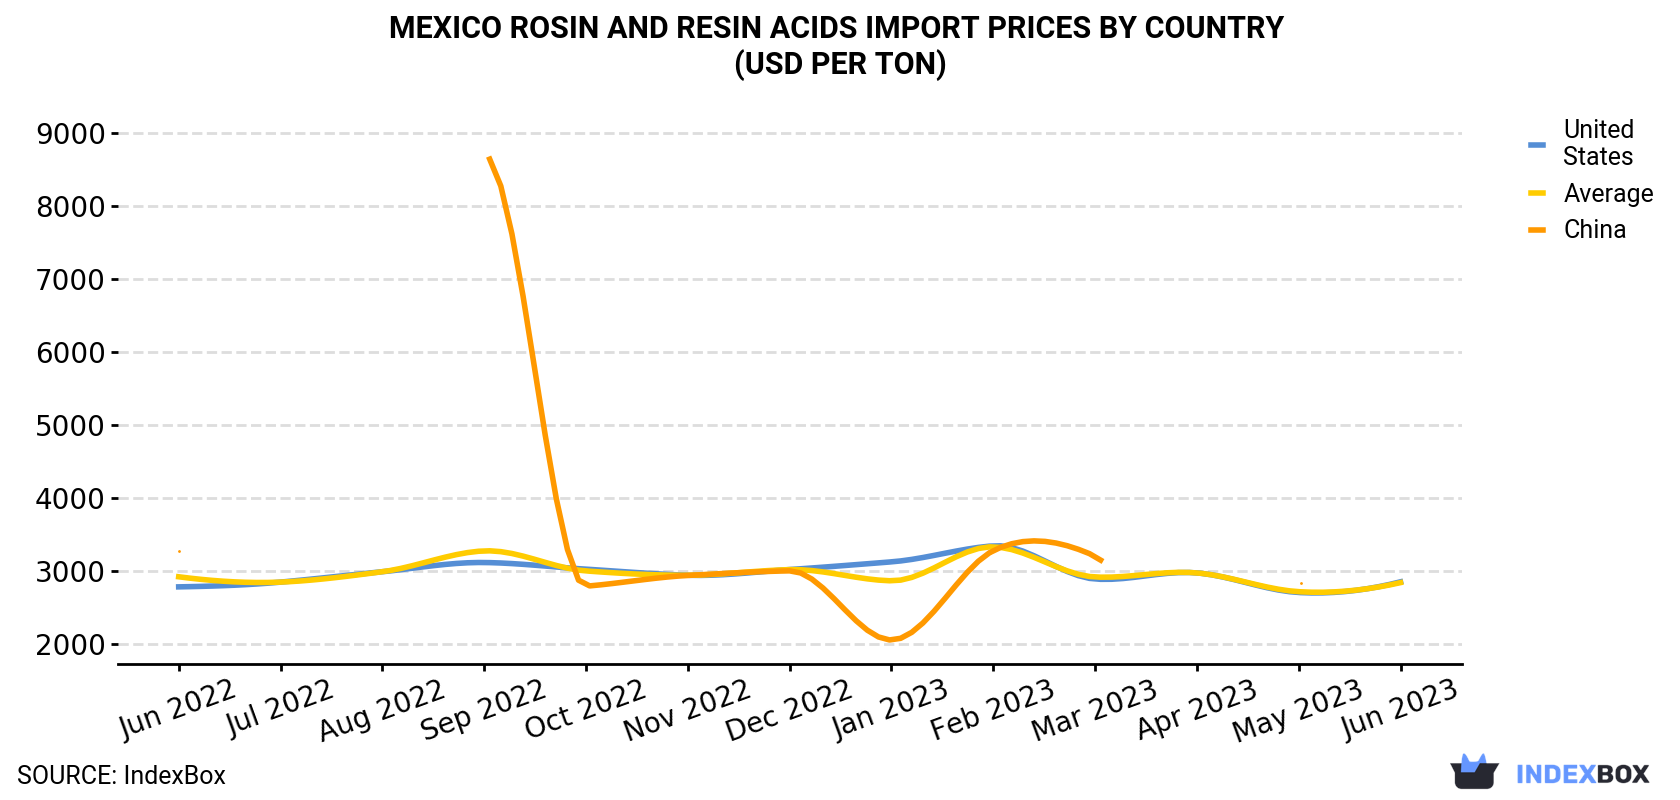 Mexico Rosin And Resin Acids Import Prices By Country (USD Per Ton)